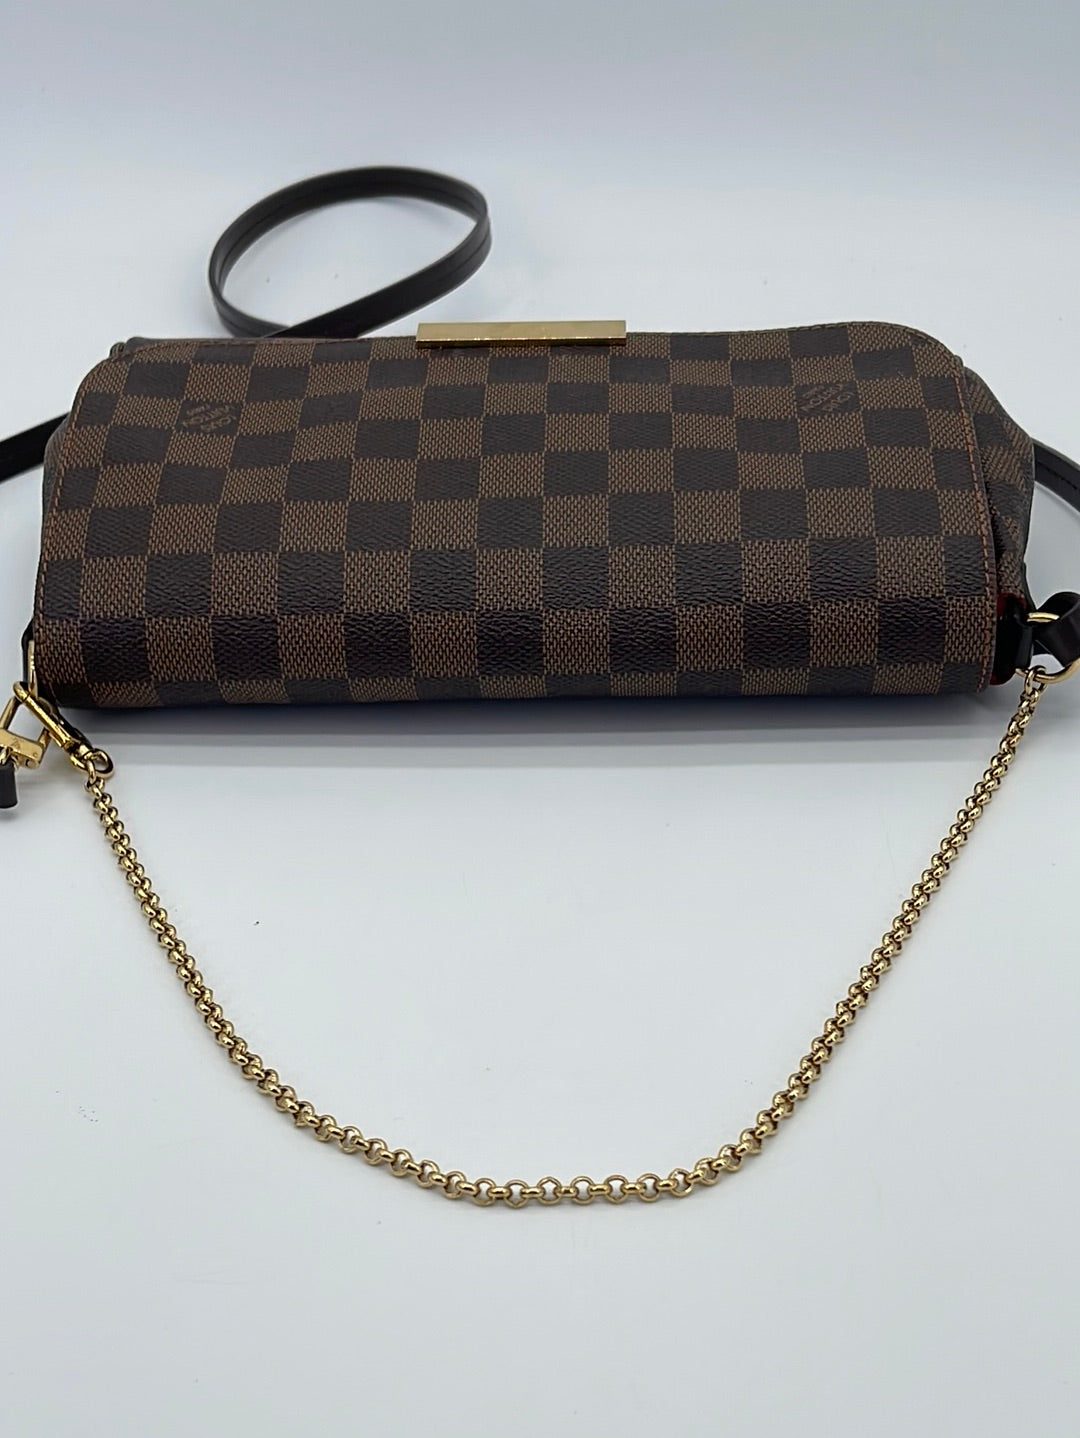 Is The Lv Favorite Discontinued